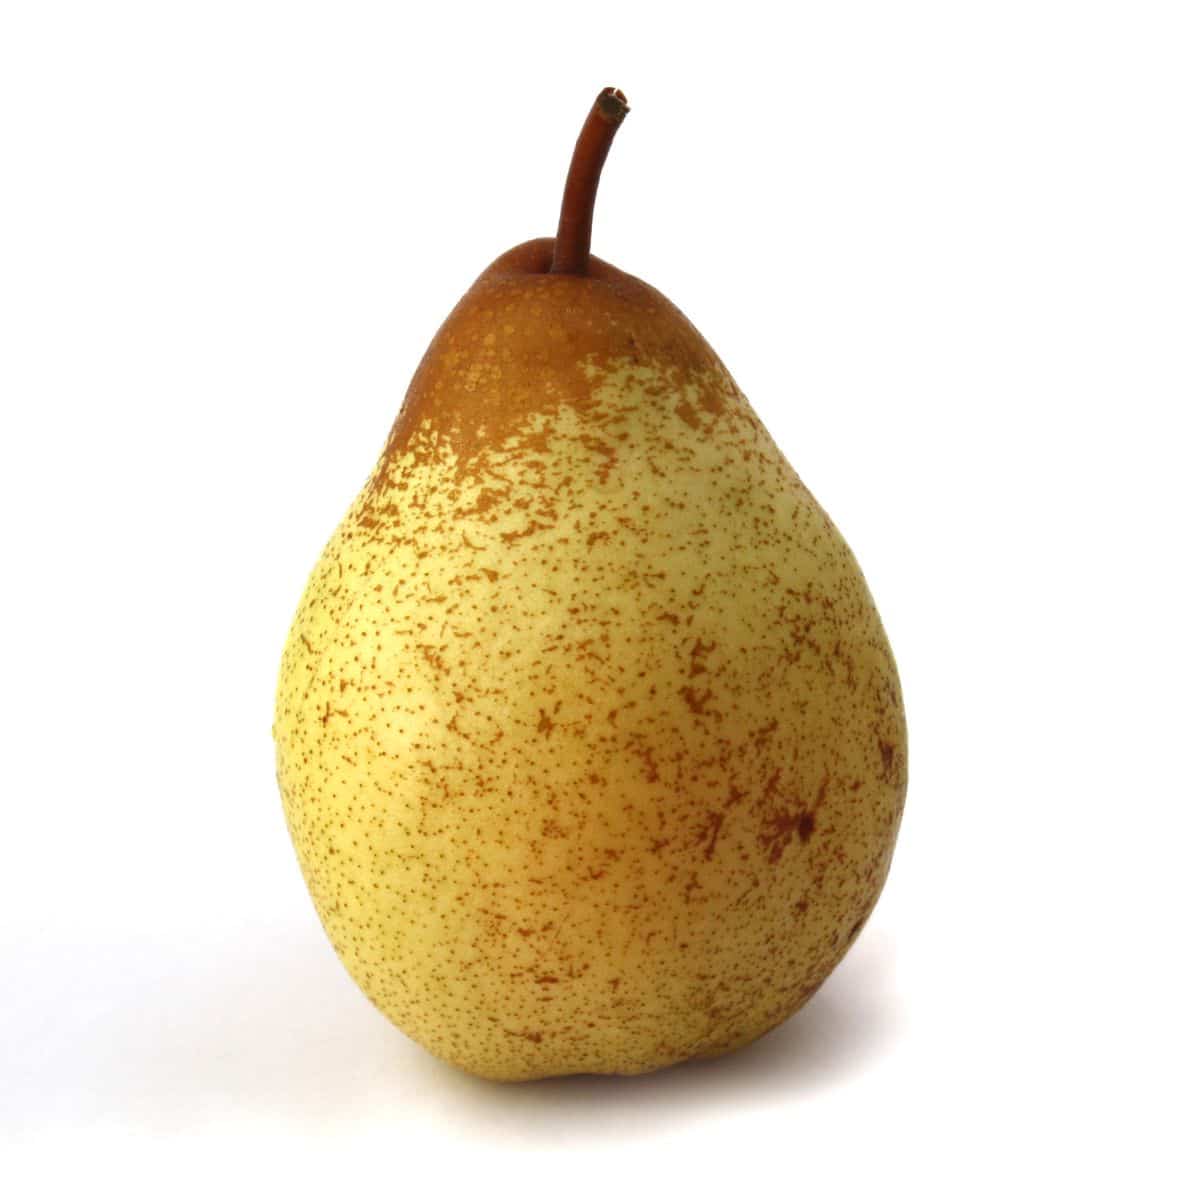 Rocha pear on a white background.